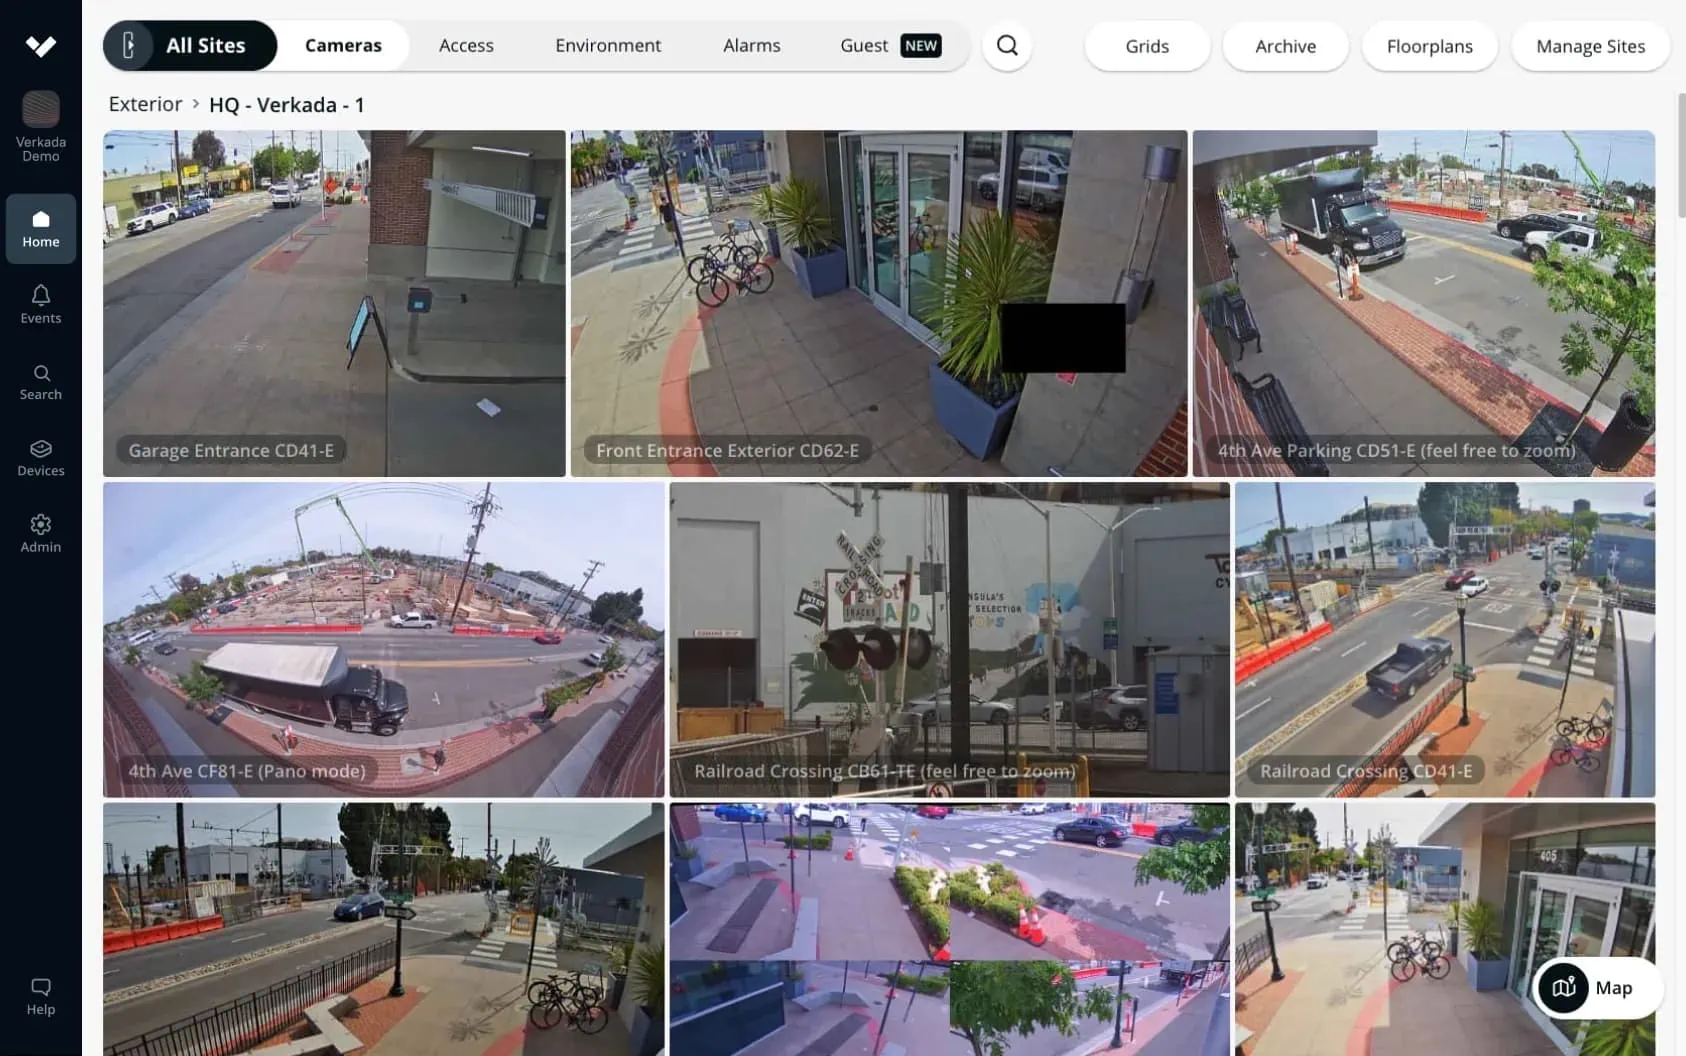 Command interface displaying footage from security cameras of a business in Greenville, SC